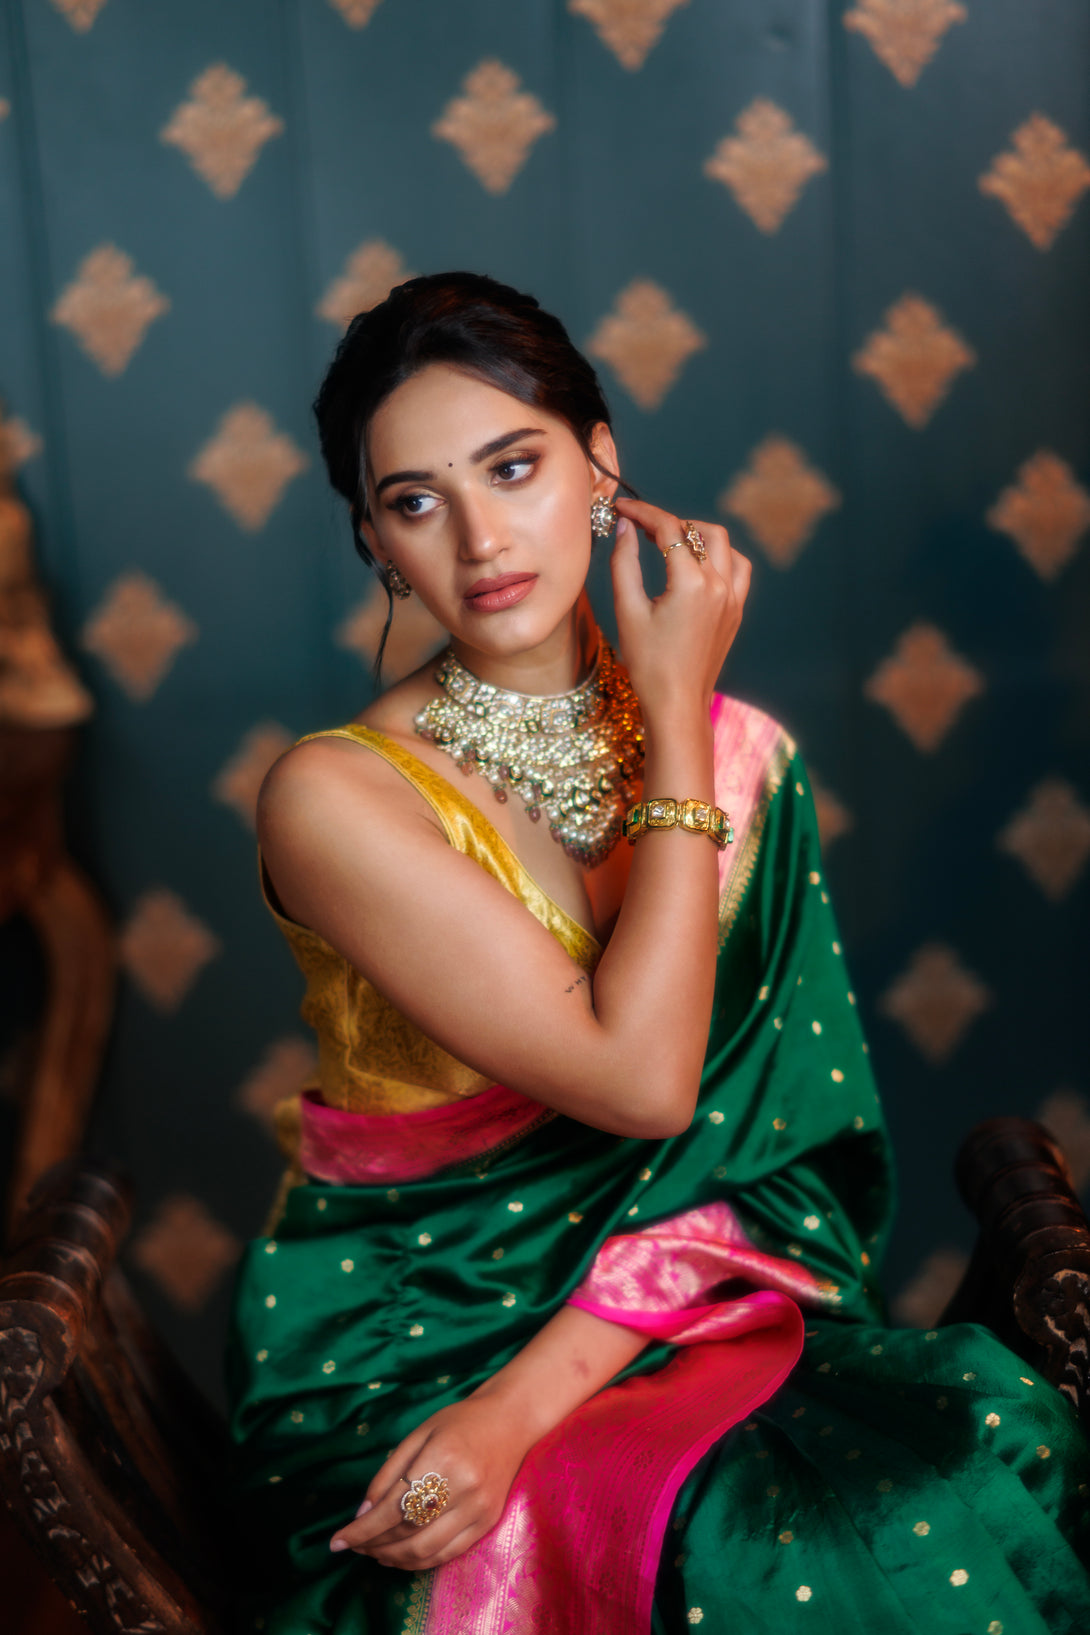 Elegant Green Handwoven Silk Saree with Vibrant Pink Contrast Border paired with complementary accessories. The saree's fusion of green and pink creates a harmonious and eye-catching ensemble, perfectly complemented by the accessories for a complete and stylish look.